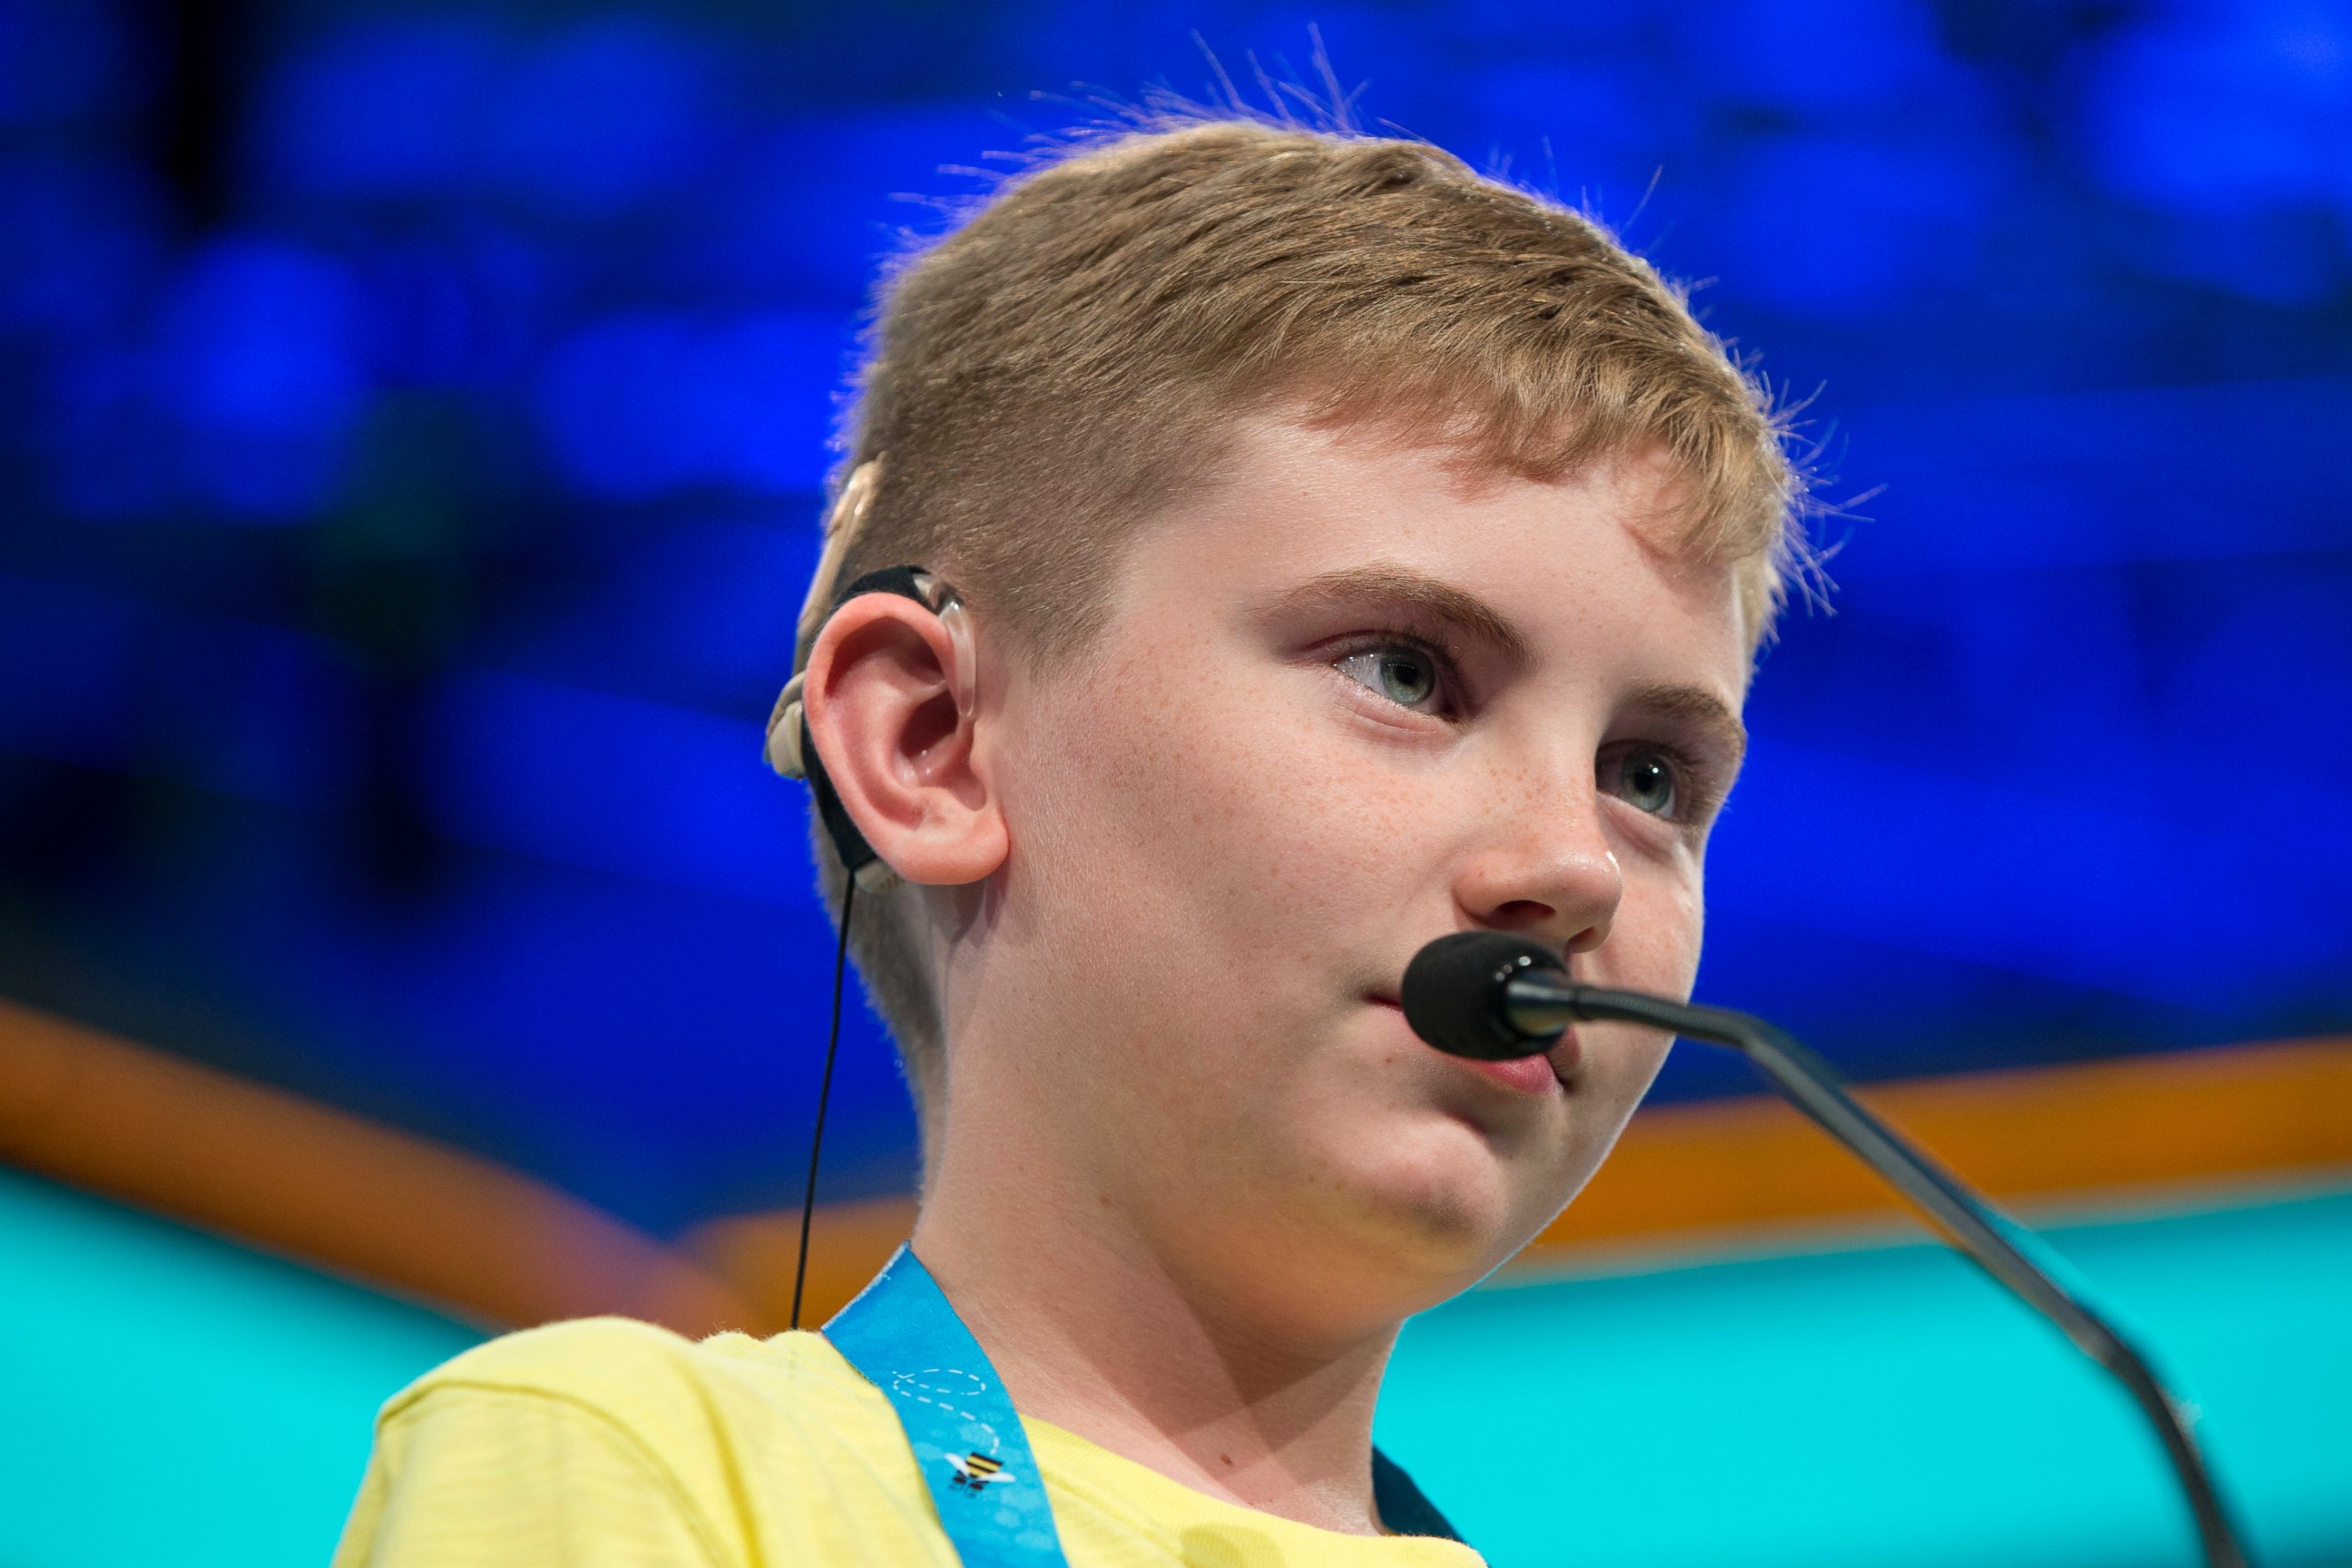 PHOTO: Neil Maes, 11, of Belton, S.C., who was born deaf and now hears with the helps of cochlear implants, competes during the preliminaries of the 2016 National Spelling Bee in National Harbor, Md., May 25, 2016. 